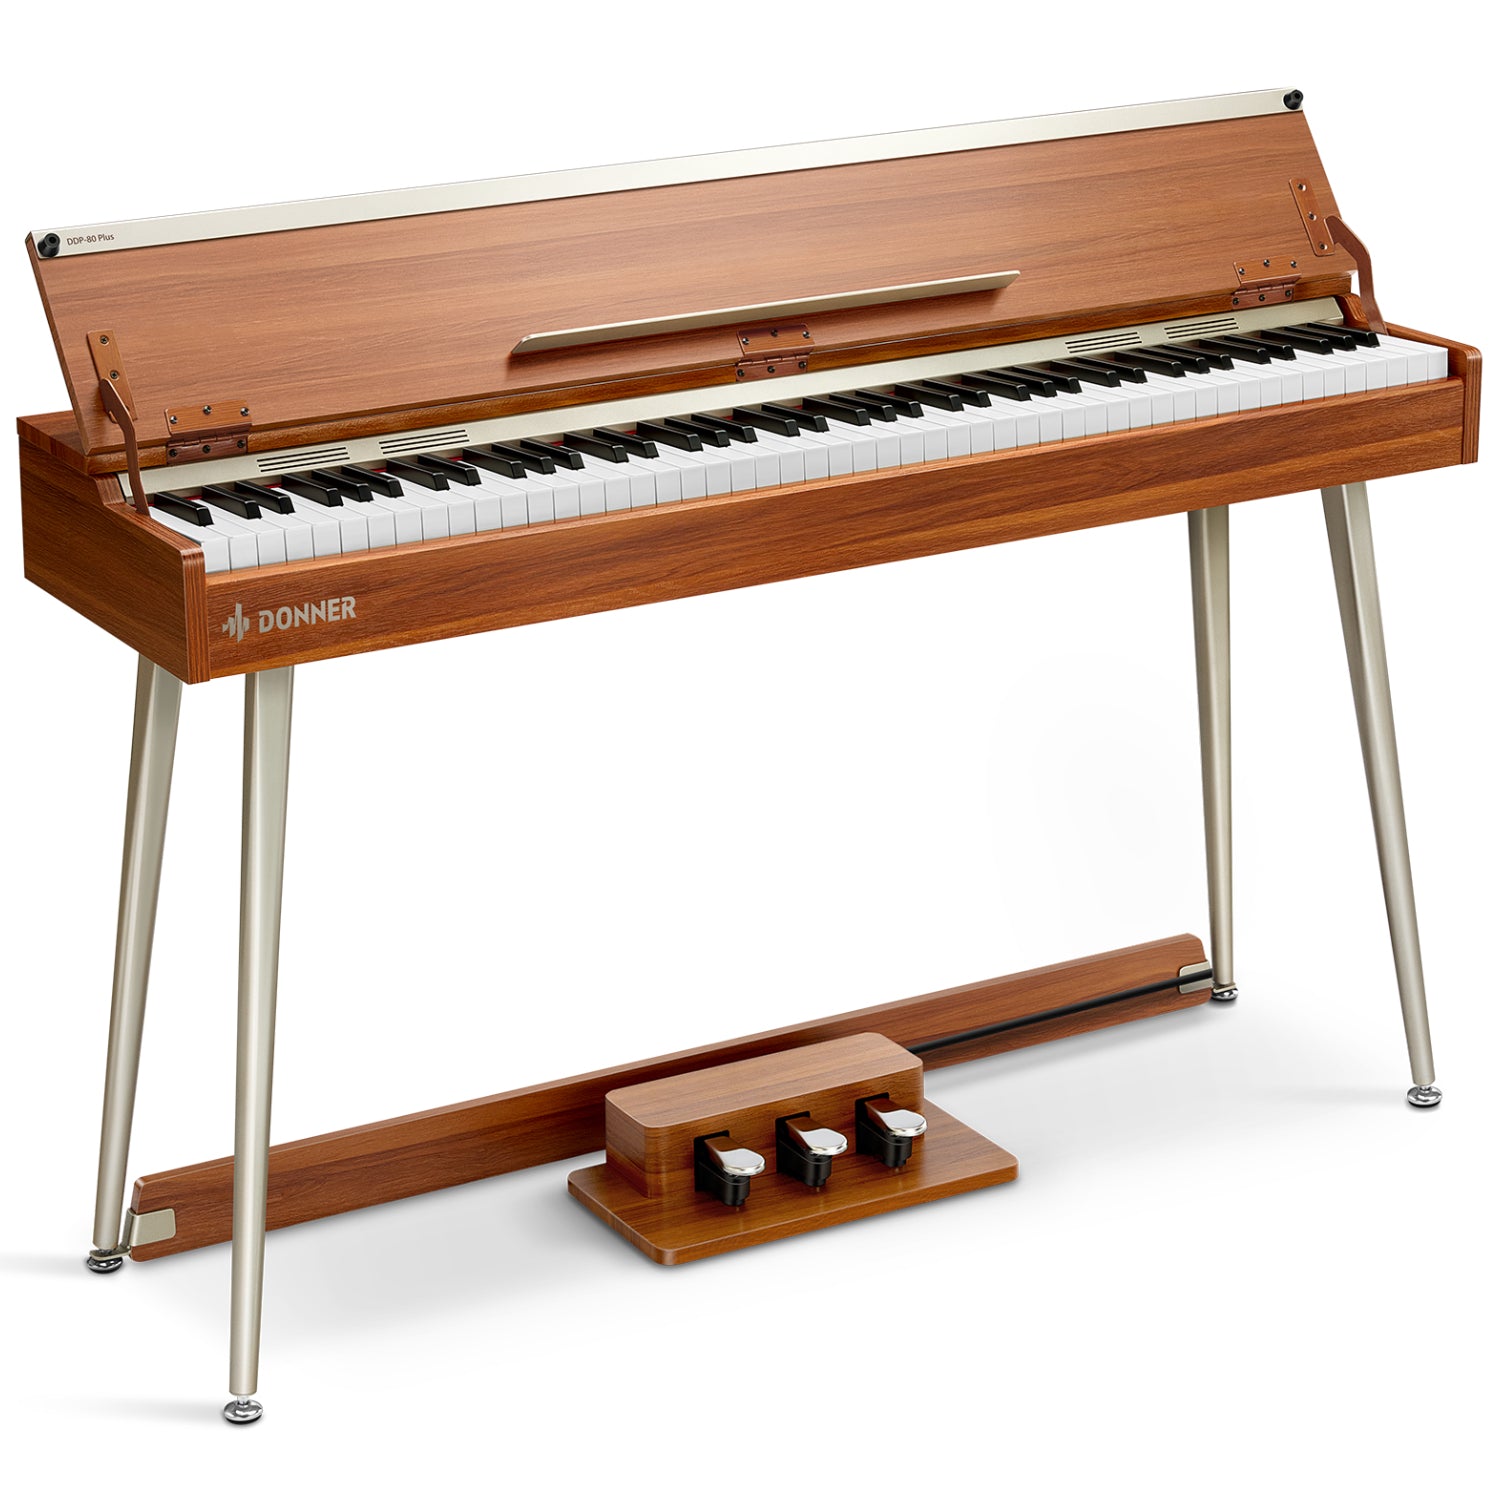 

Donner DDP-80 PLUS 88 Key Weighted Wooden Upright Digital Piano with Semi-open Cover